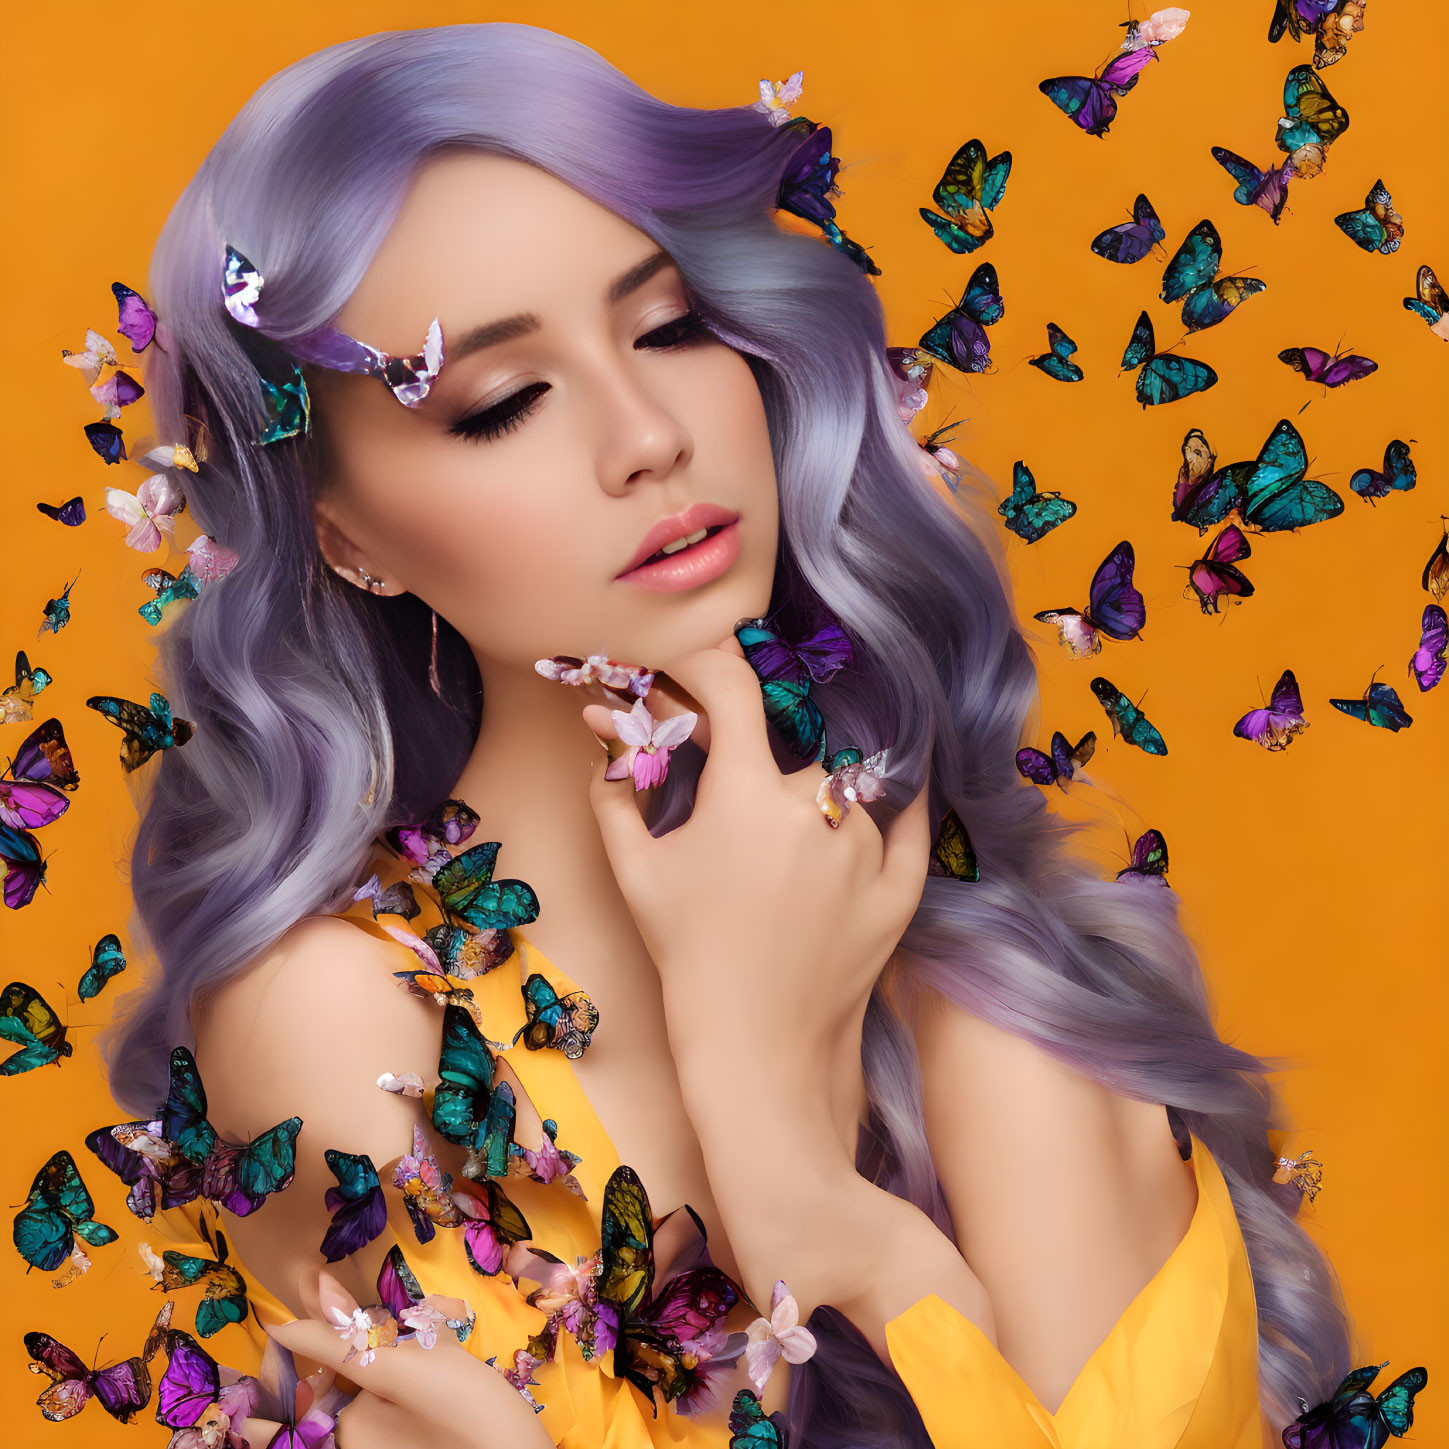 Lilac-haired woman with butterflies on yellow background